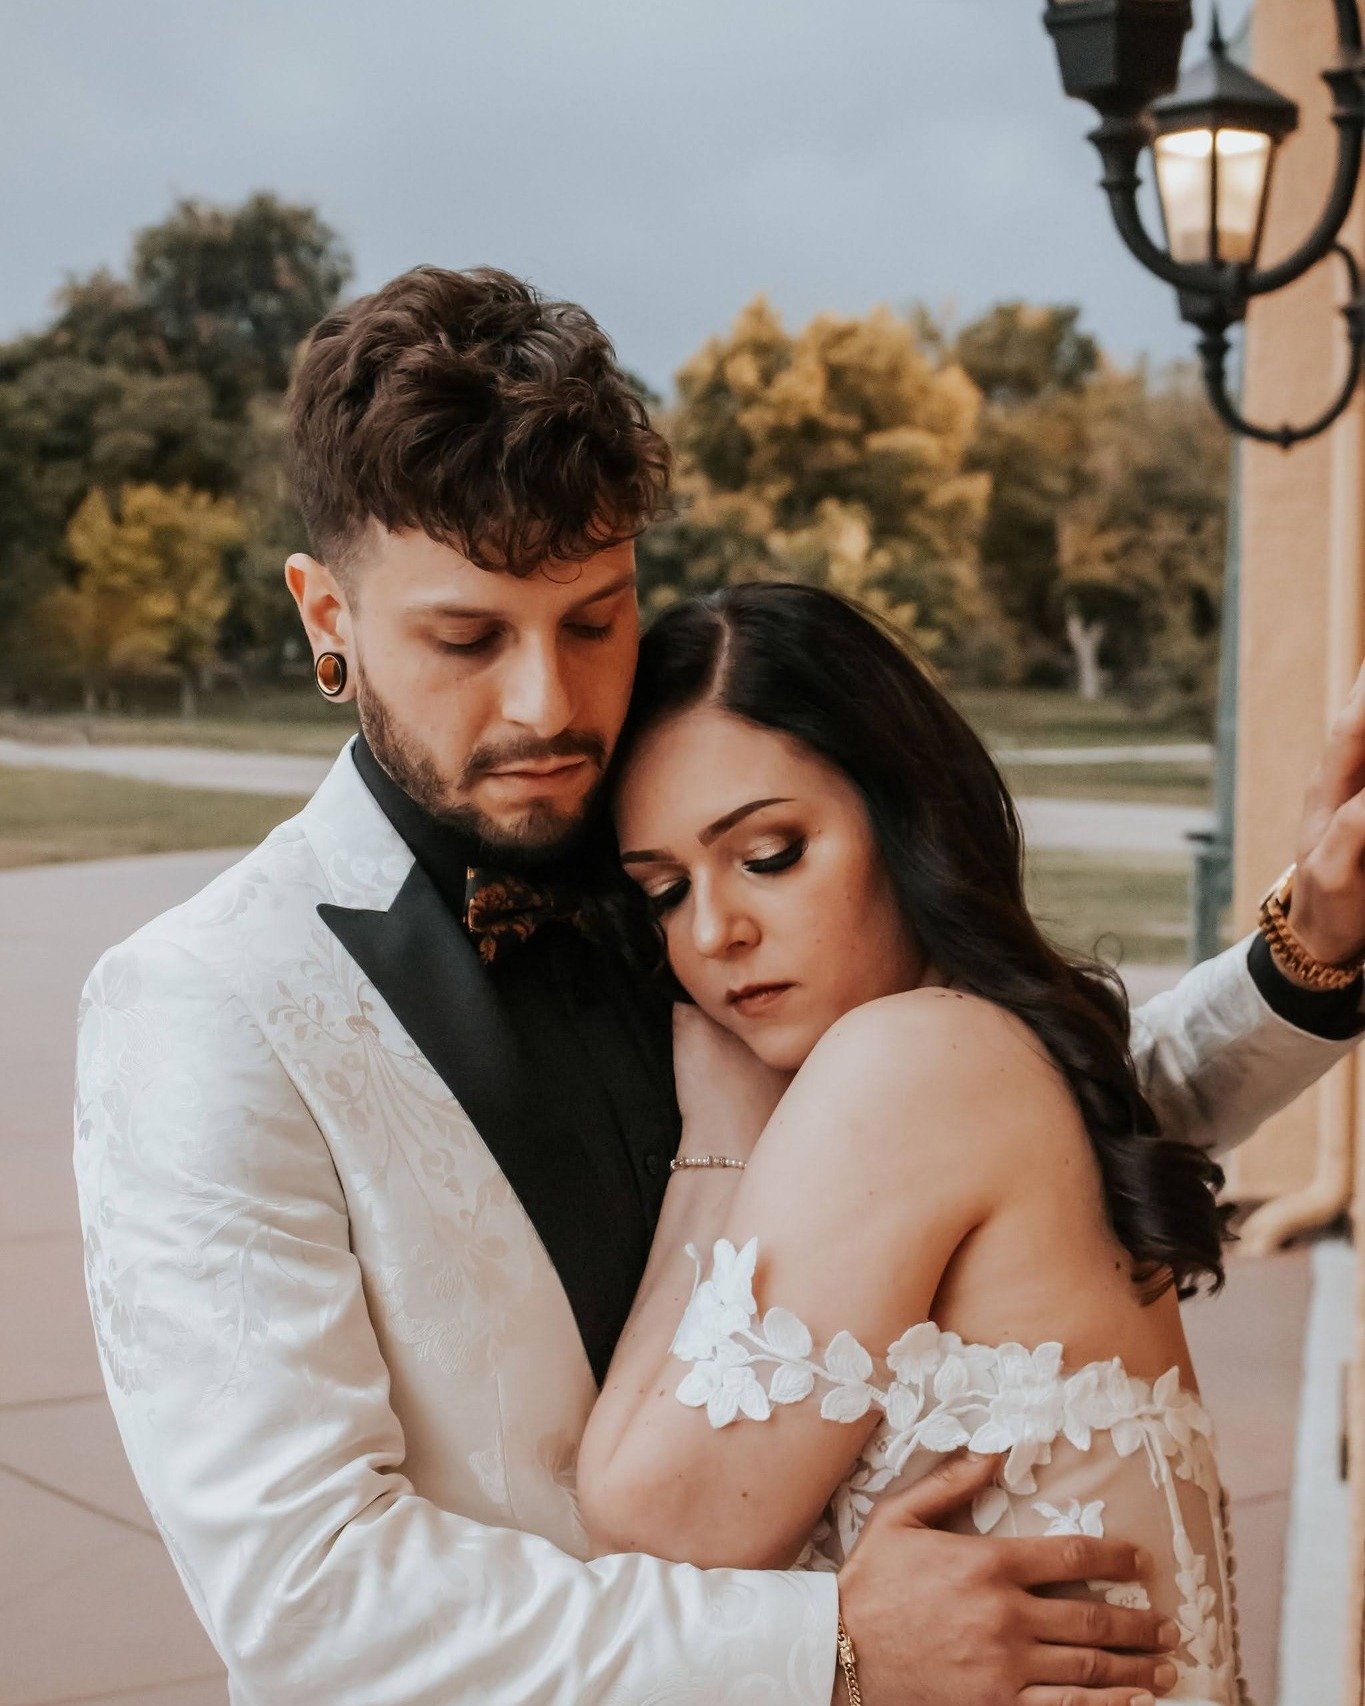 You will be my forever, always. Olivia, who's a fan of edgy styles, specifically requested a makeup look with a moody and dark vibe.

Makeup: Mari 
📷: @captured.by.adri 
👗: @luvbridal